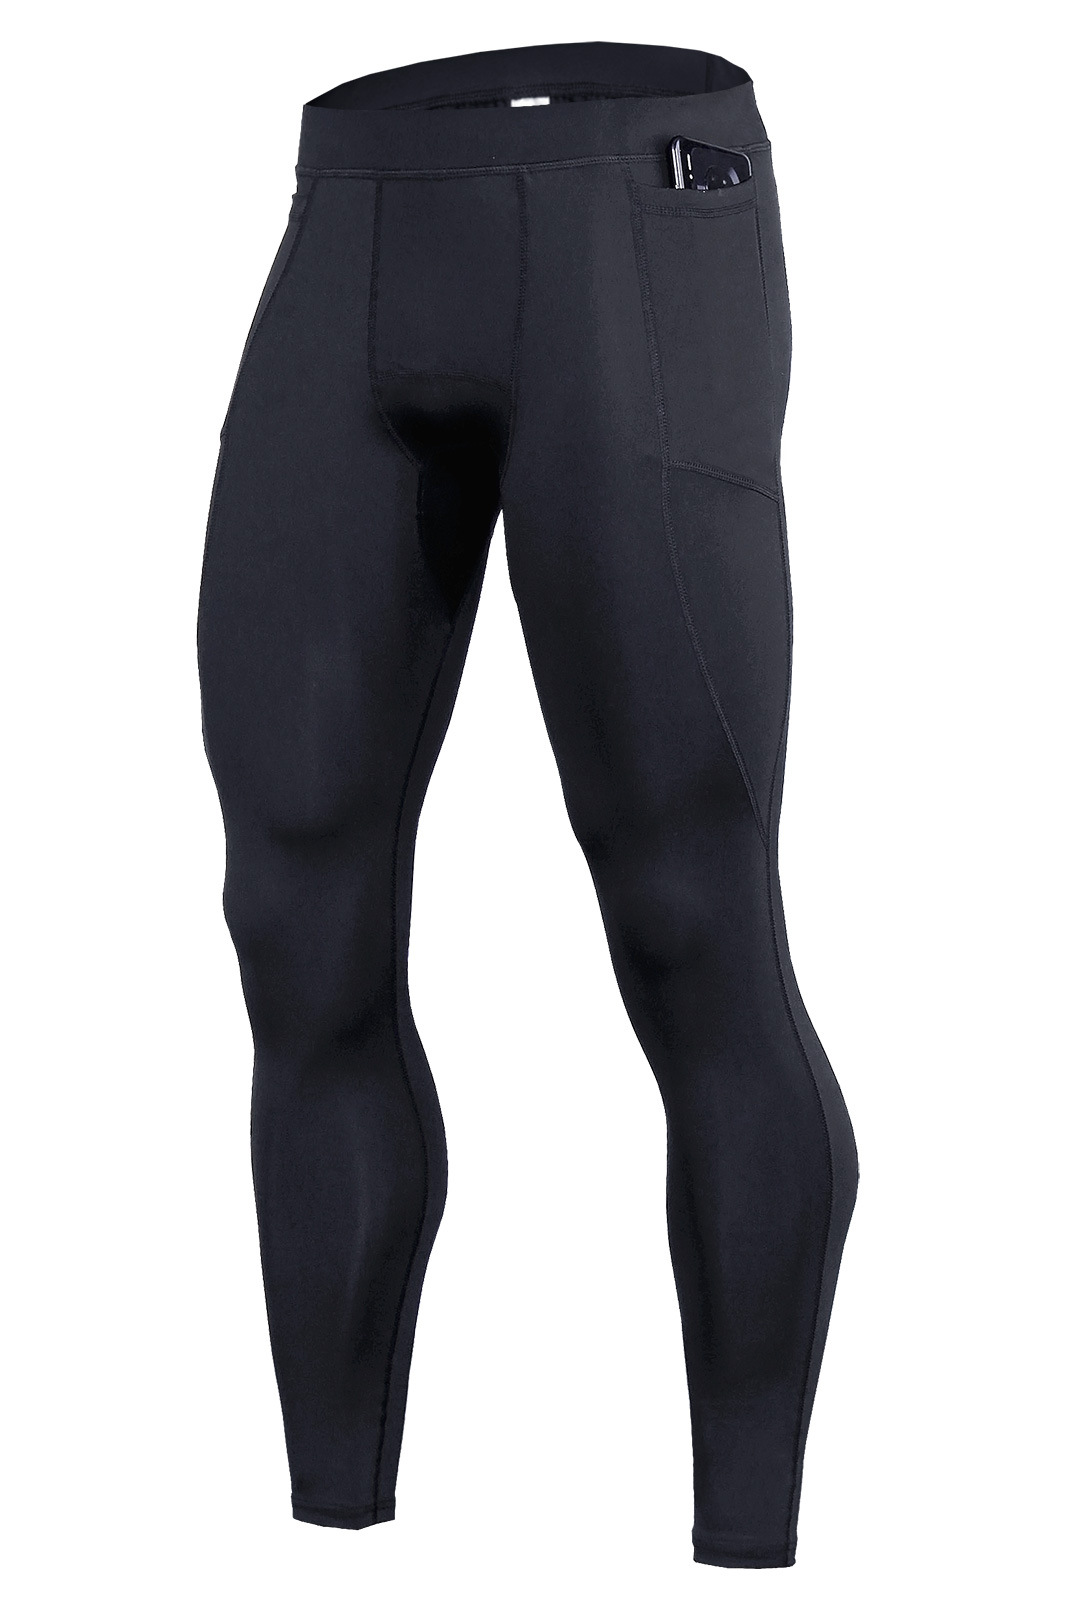 Men Breathable Quick-drying Phone Pocket Sports Tights